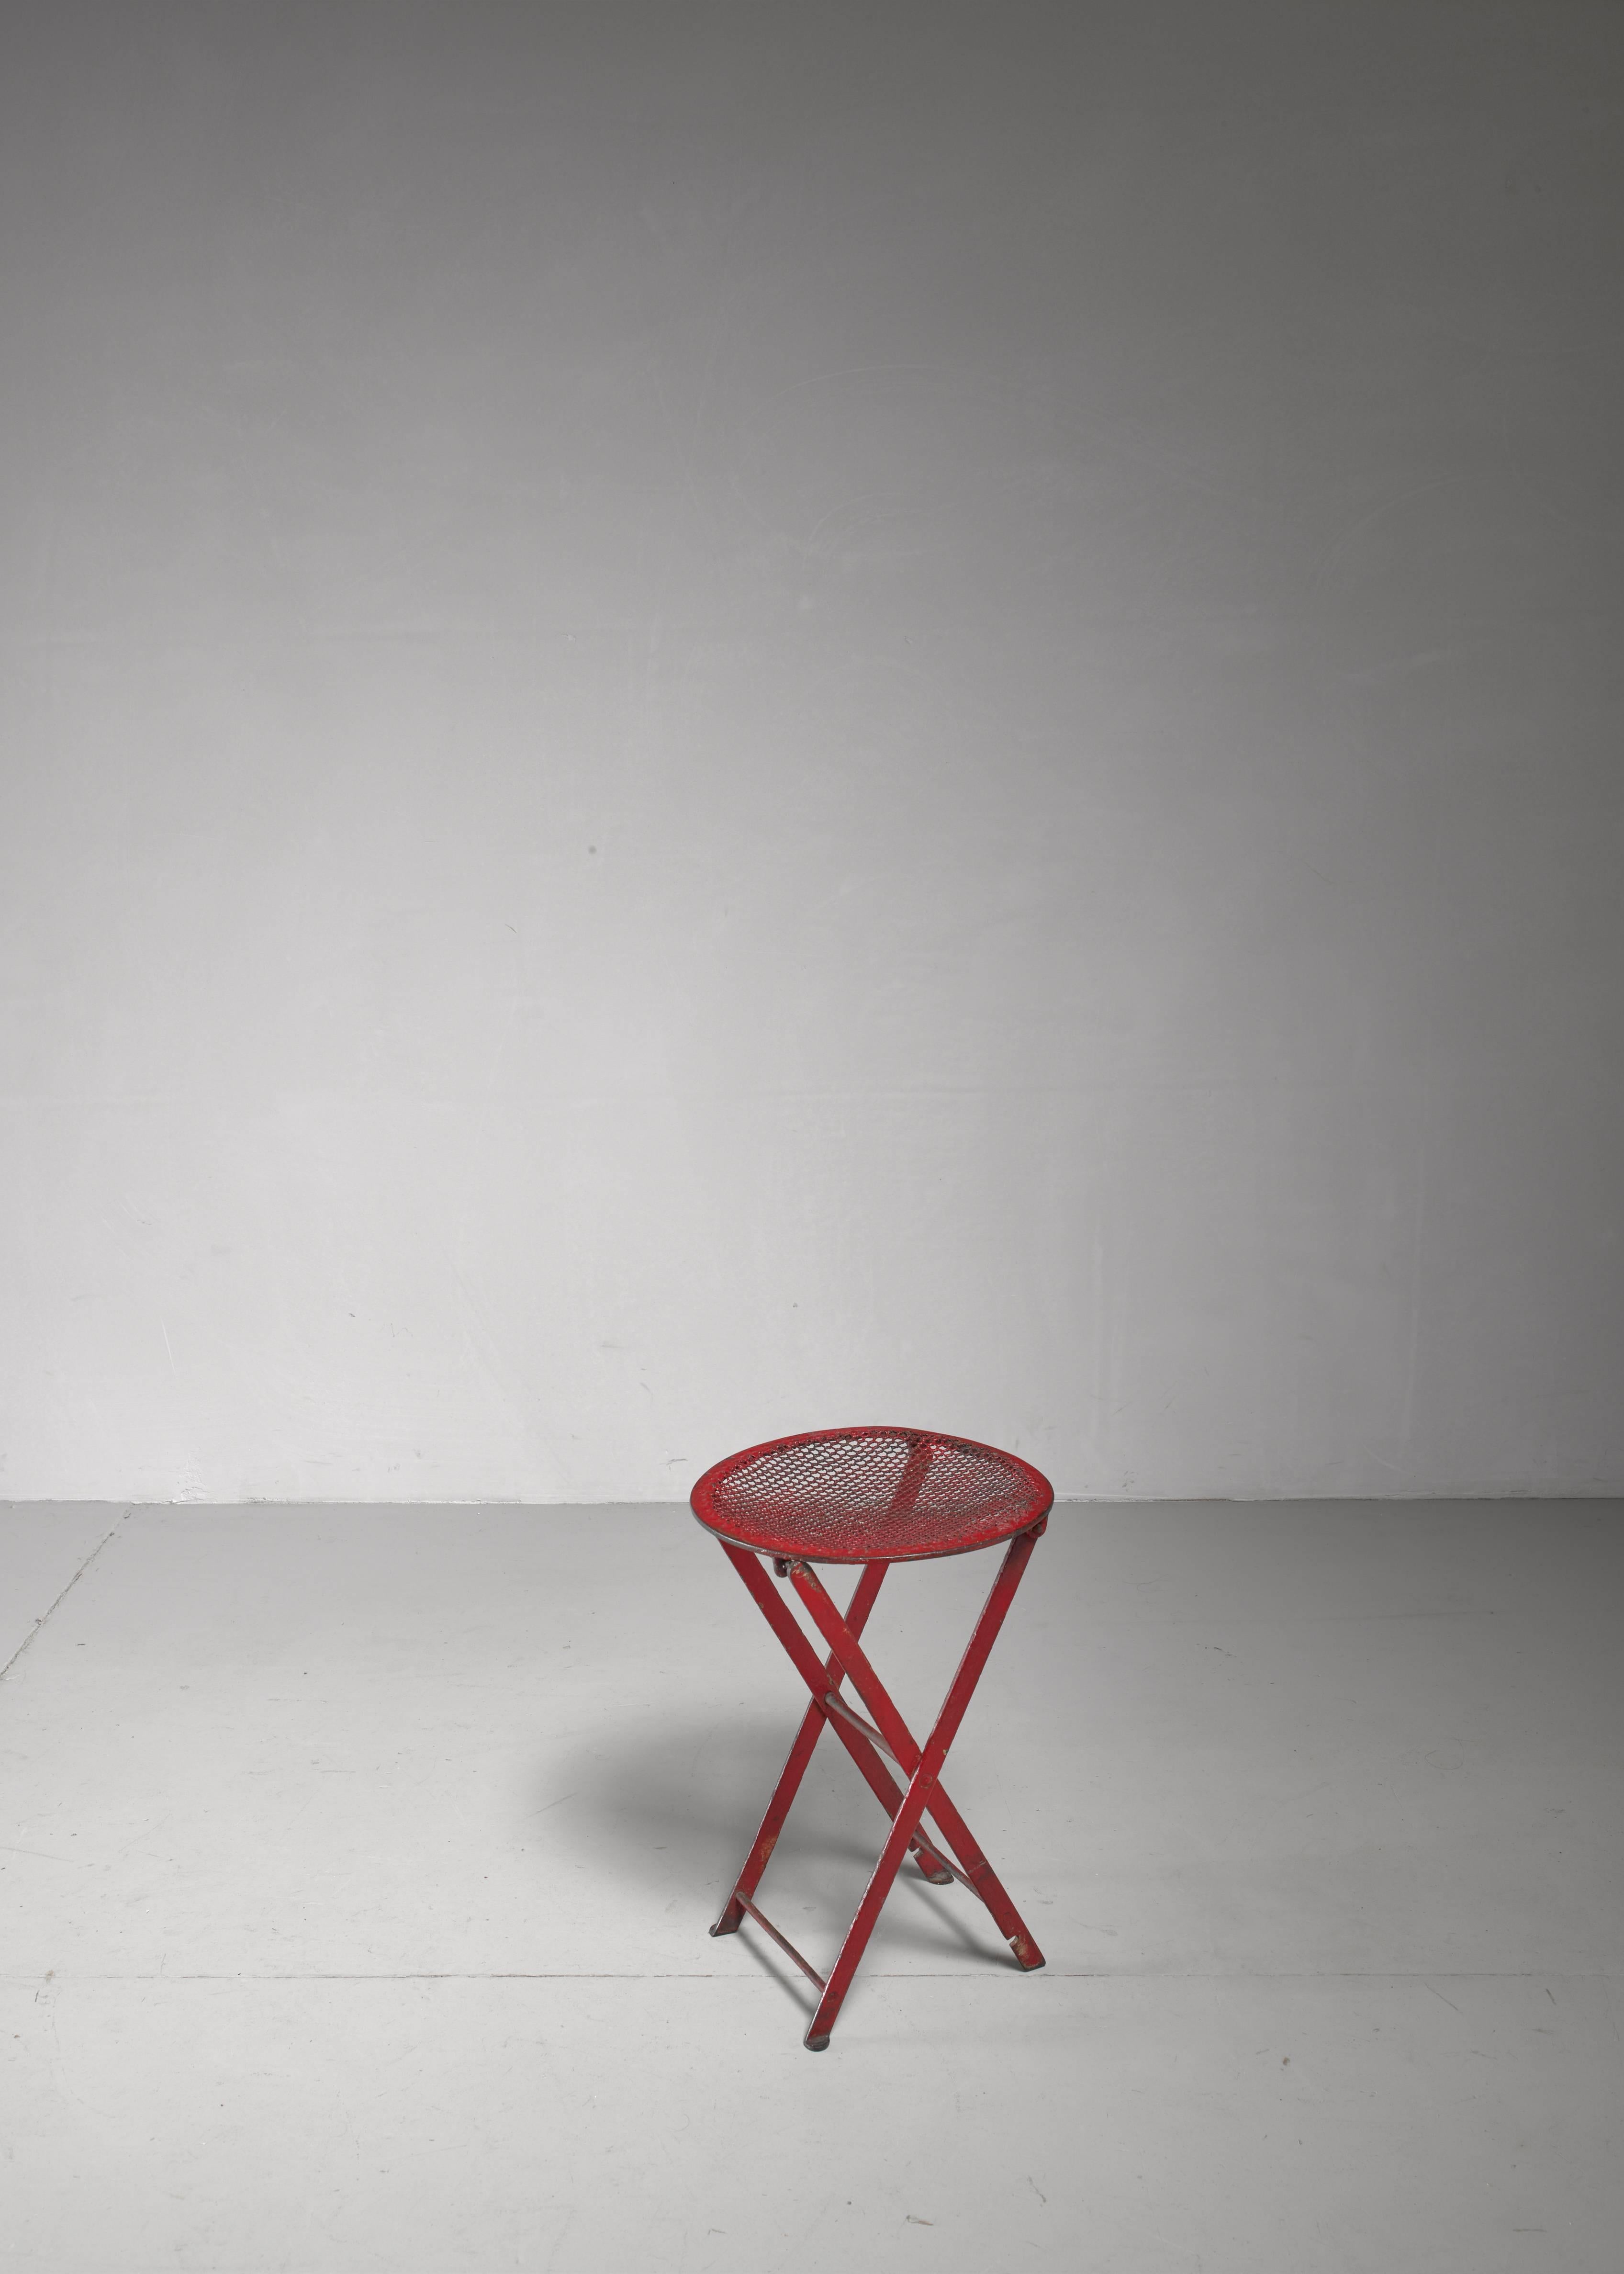 A foldable stool made of red metal and a mesh metal seating. Great for outdoor use and/or as side or plant table. 